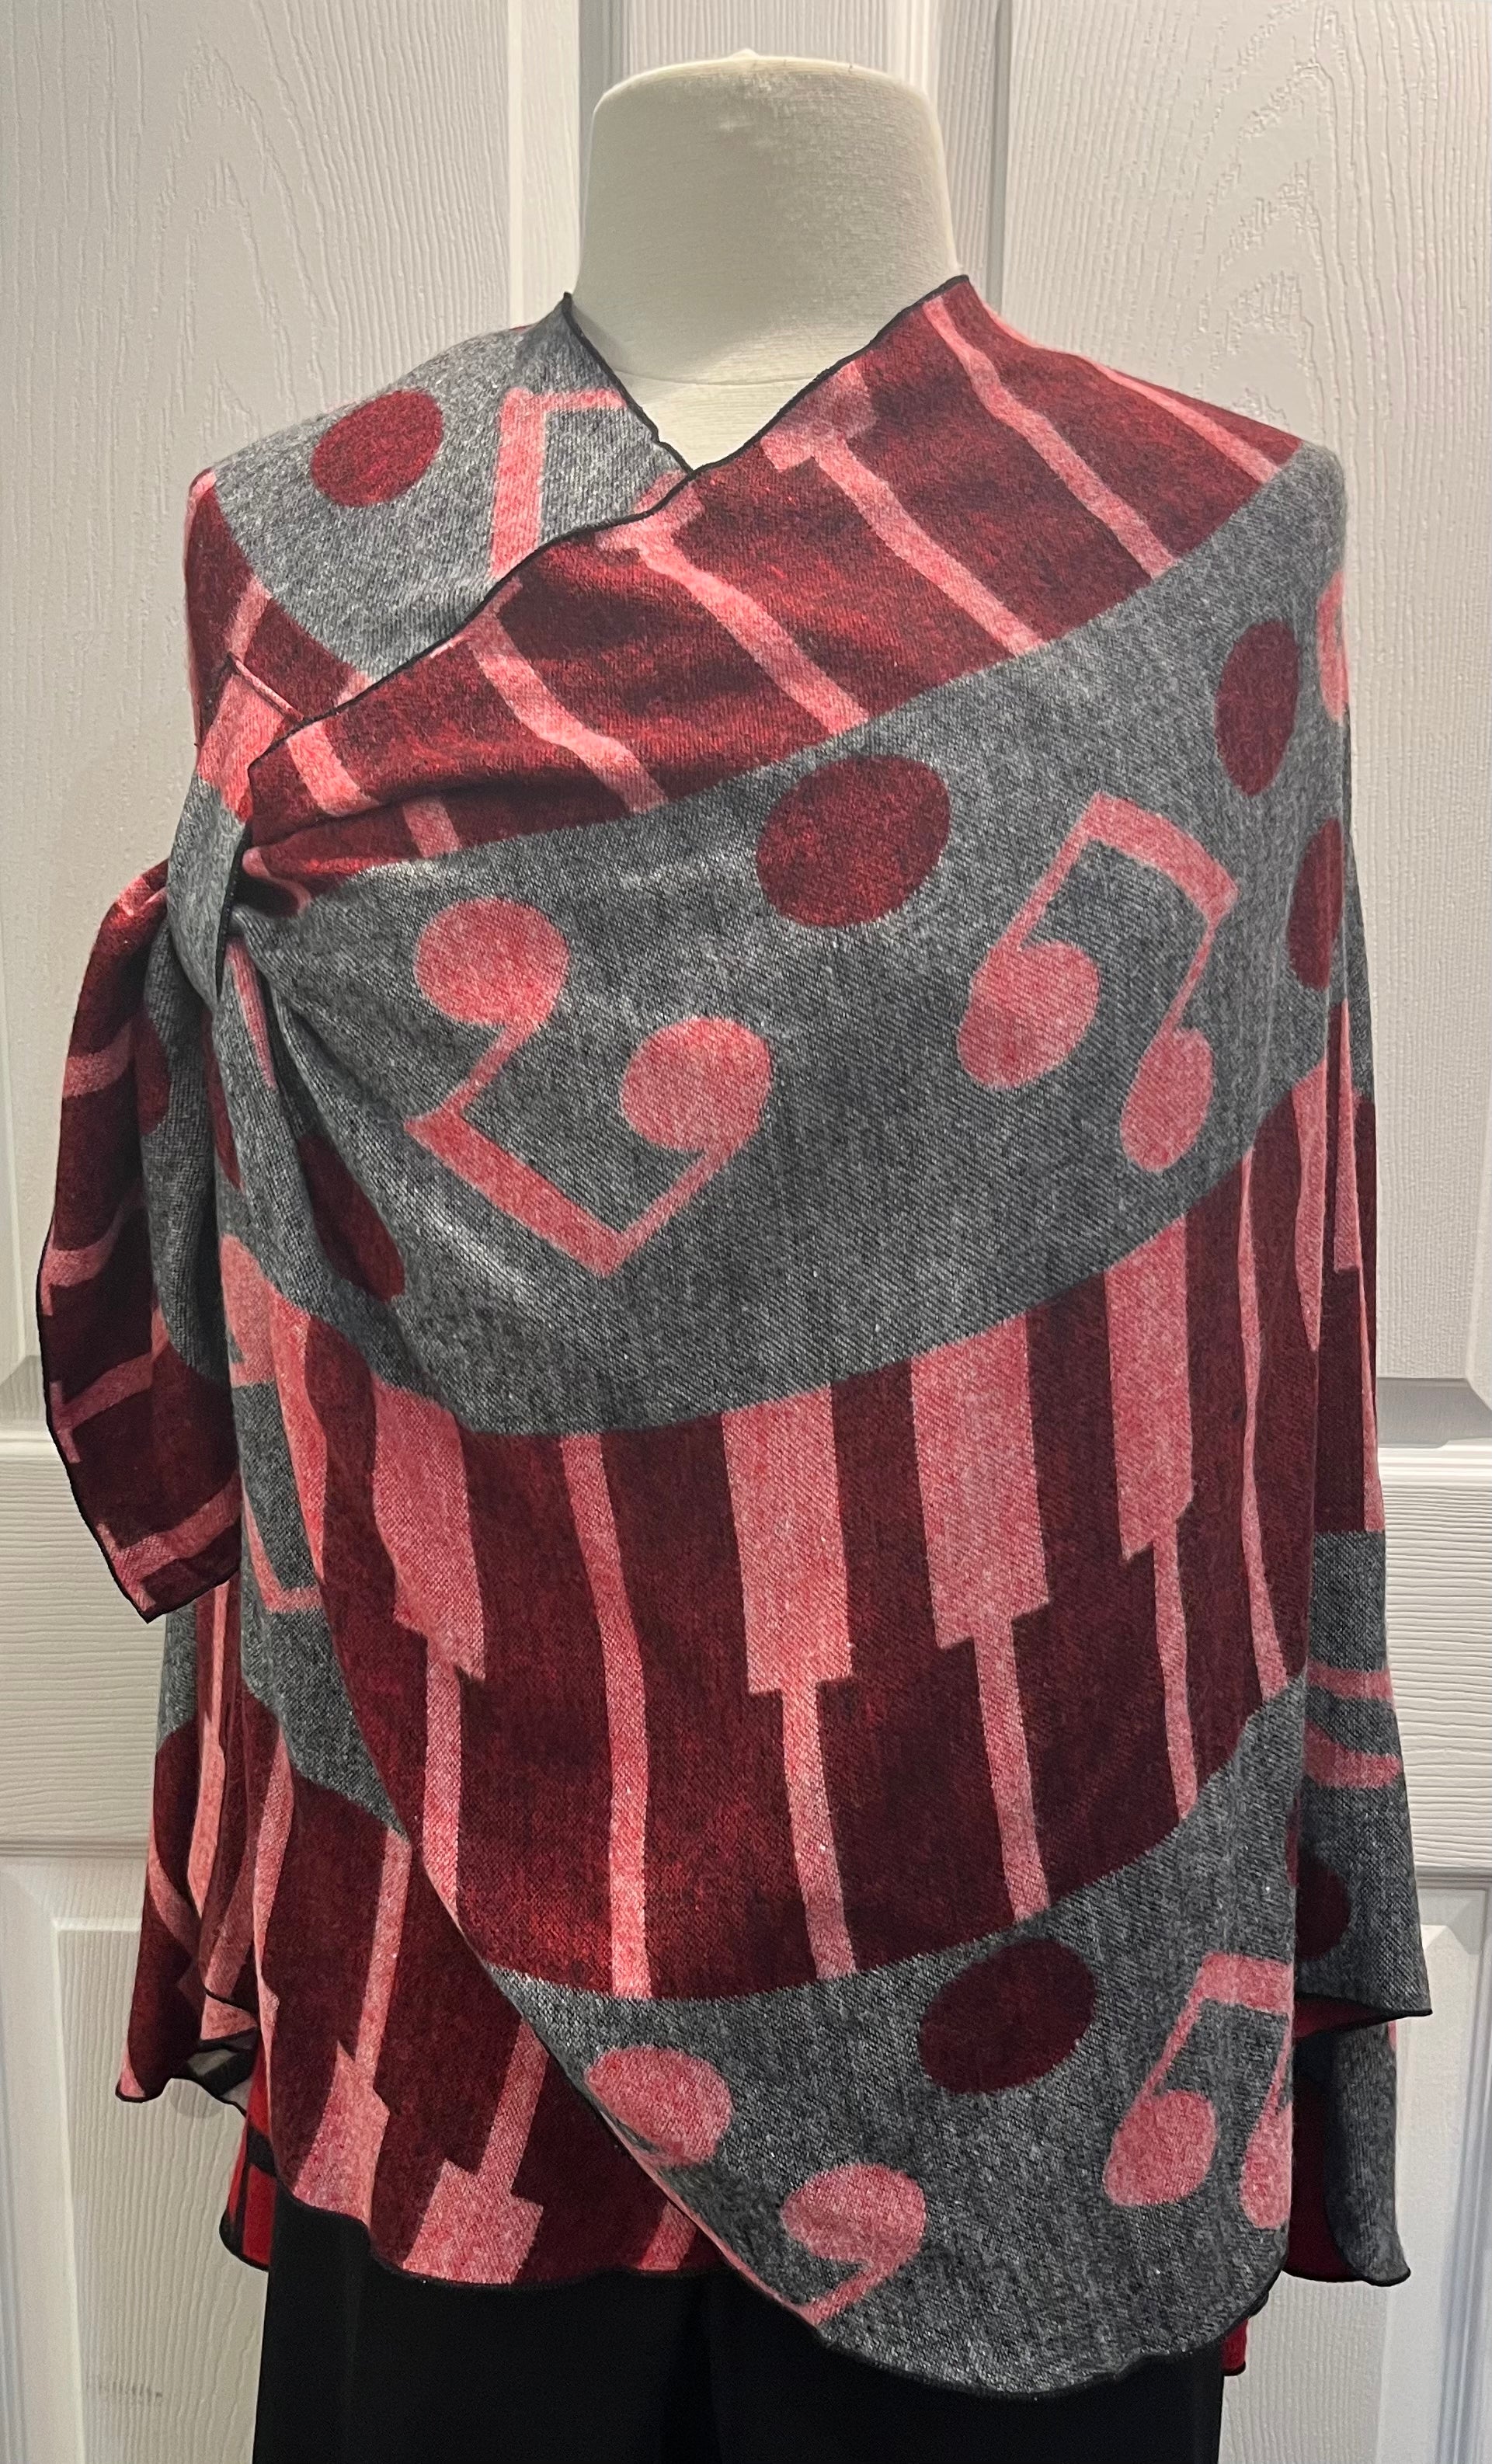 Piano/Musical Notes Reversible Cashmere Shawl